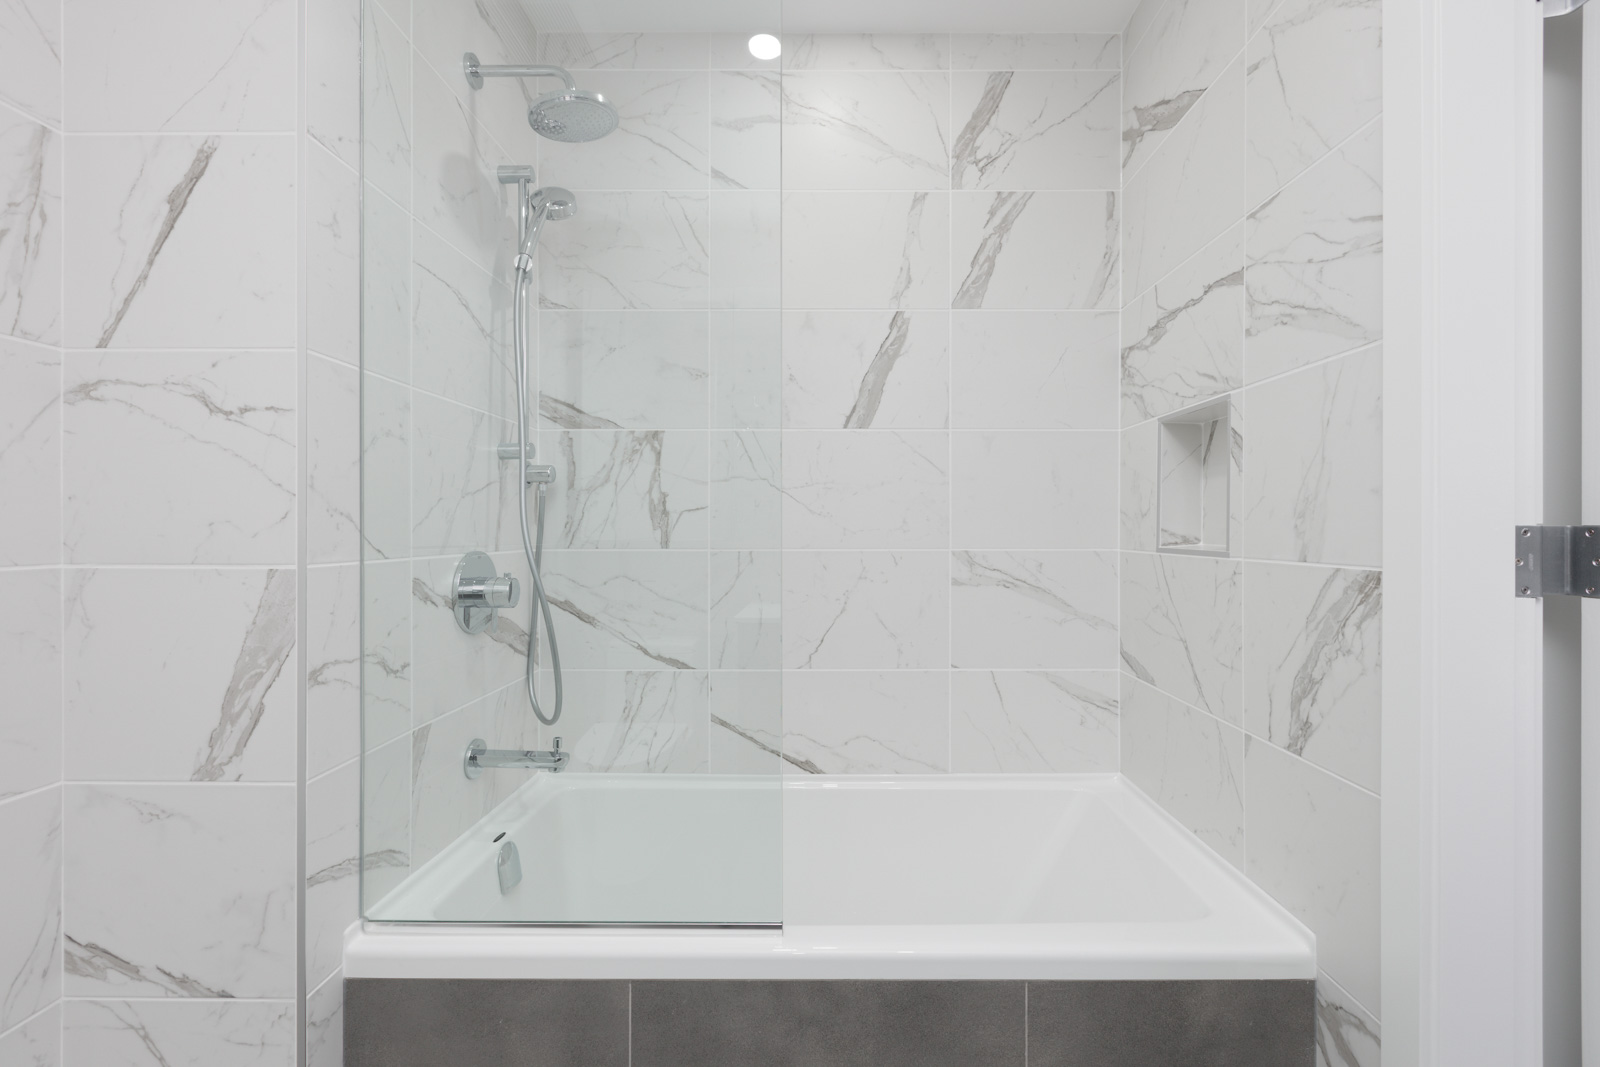 marble style bathroom walls with glass divider and deep soaker tub